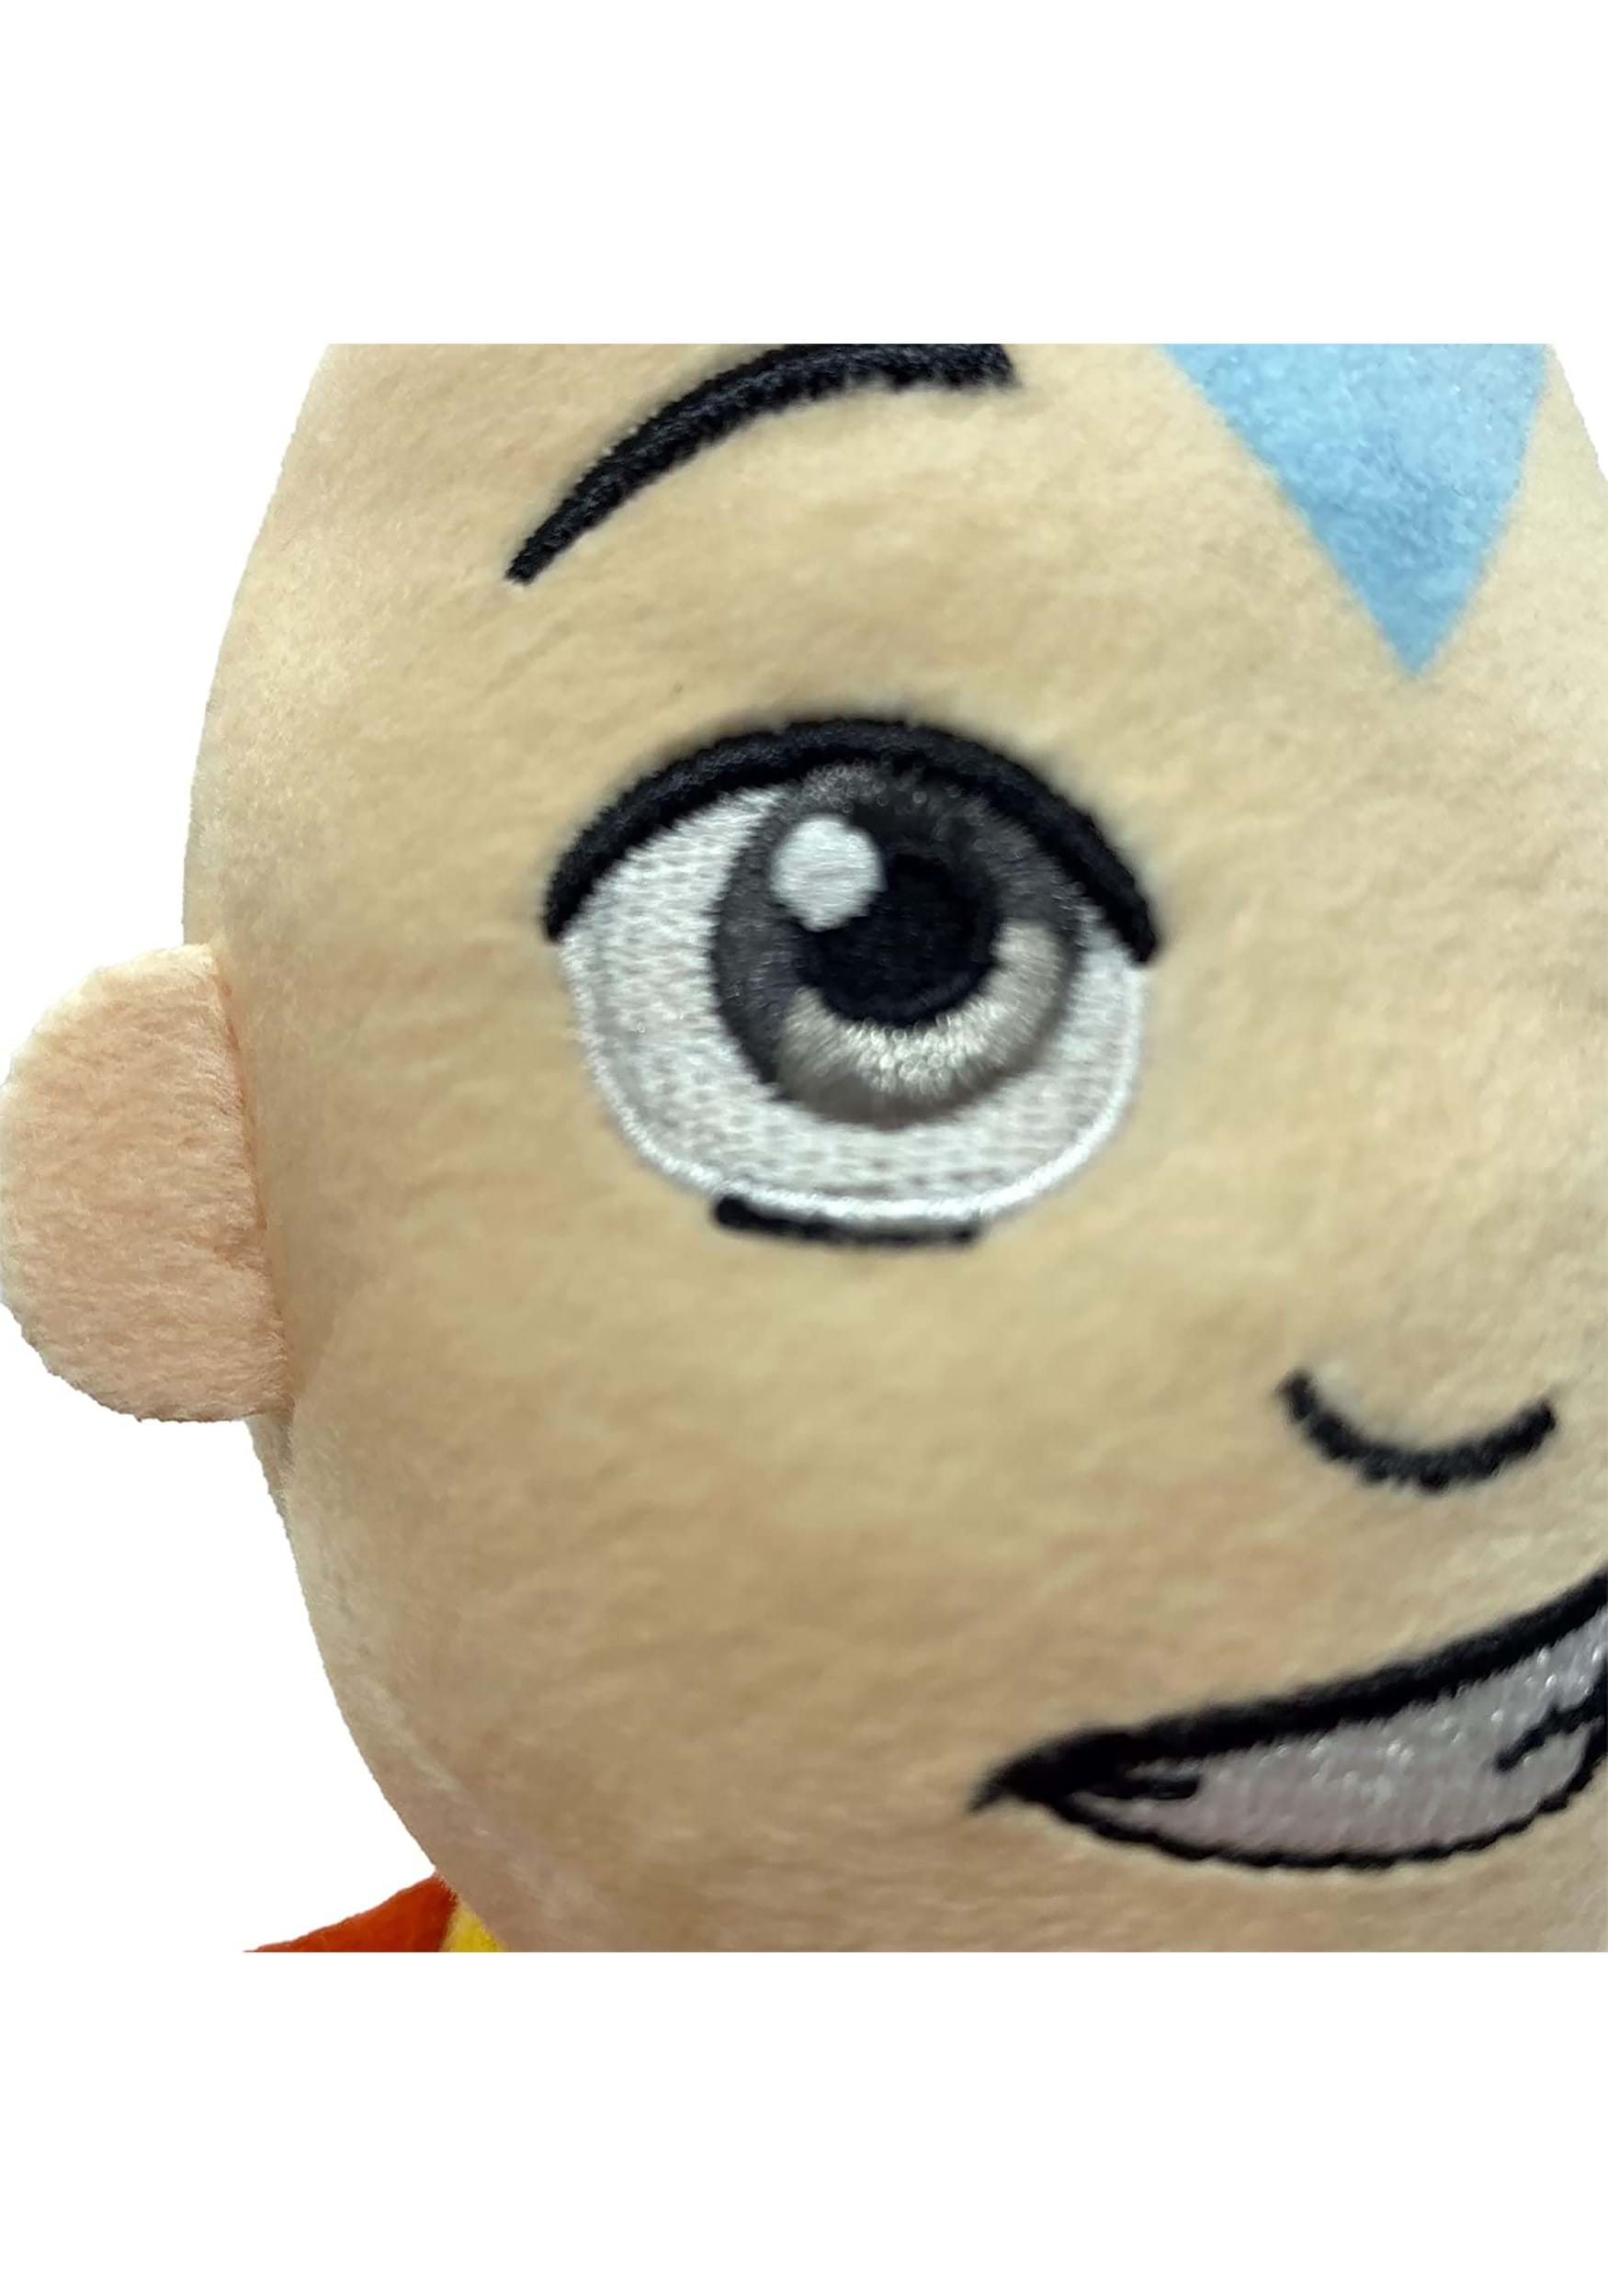 Avatar Aang 7.5 Inch Plush , The Last Airbender Plush Toys